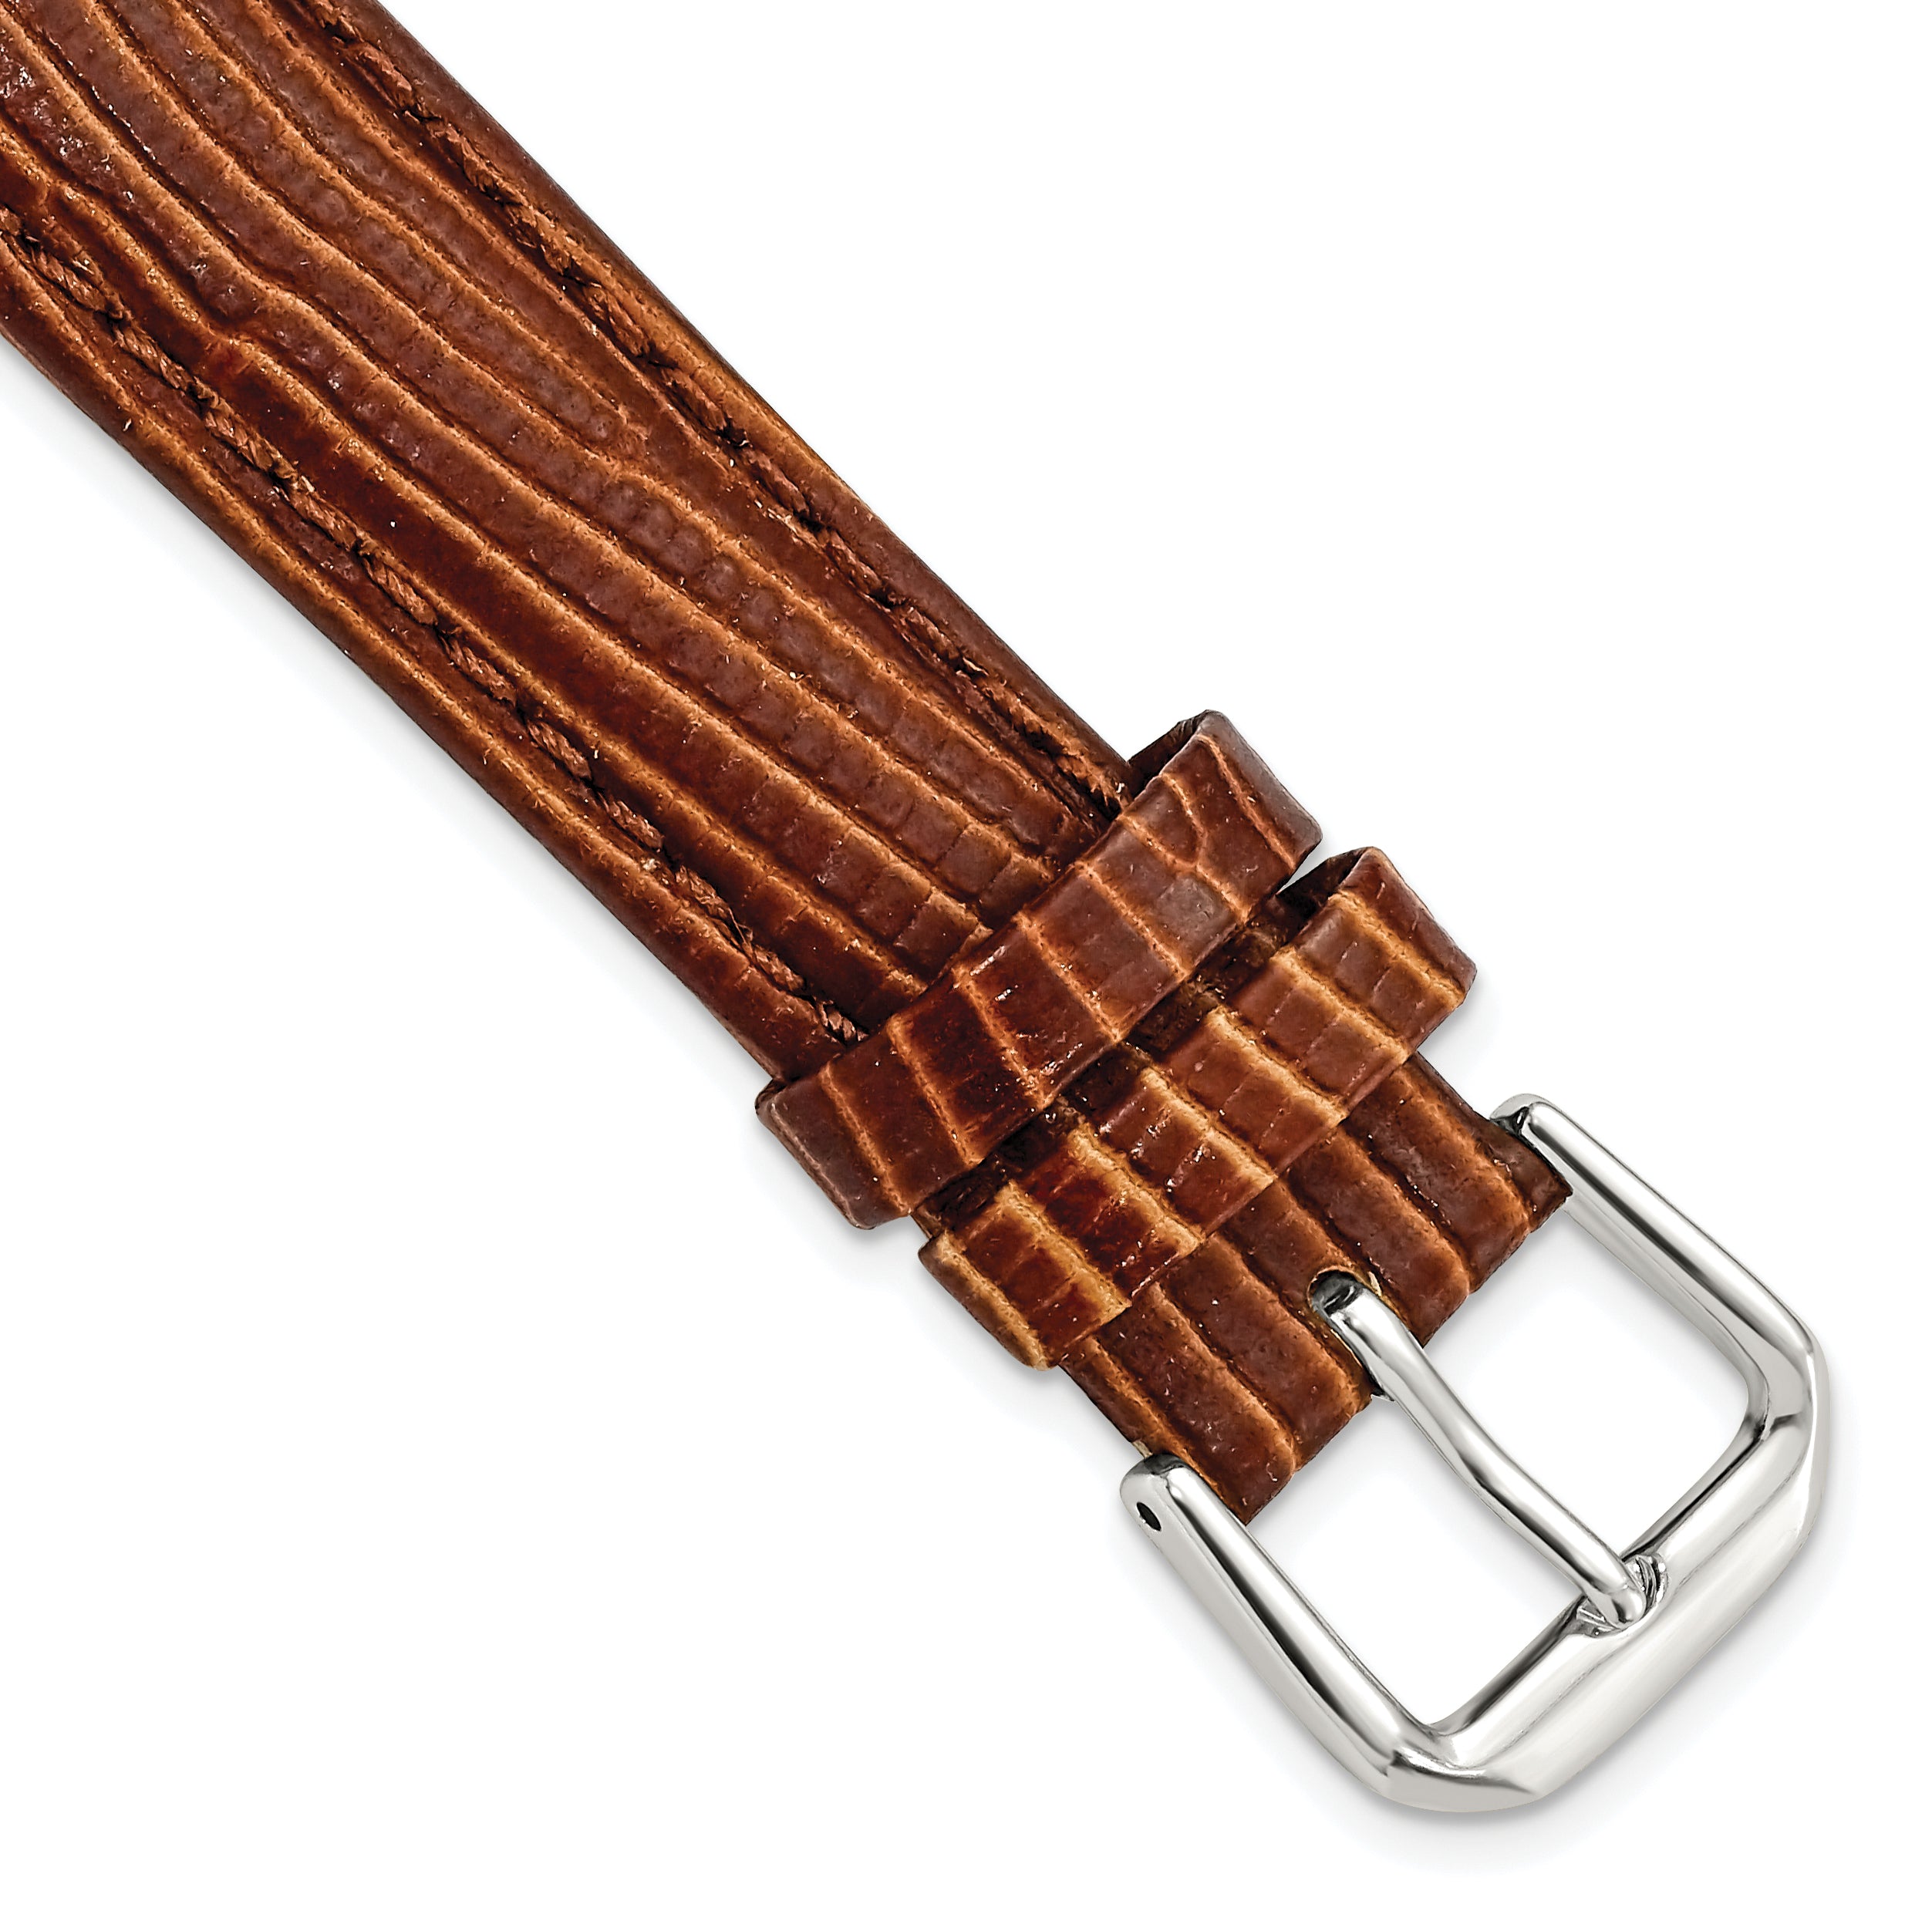 DeBeer 16mm Havana Brown Snake Grain Leather with Silver-tone Buckle 7.5 inch Watch Band